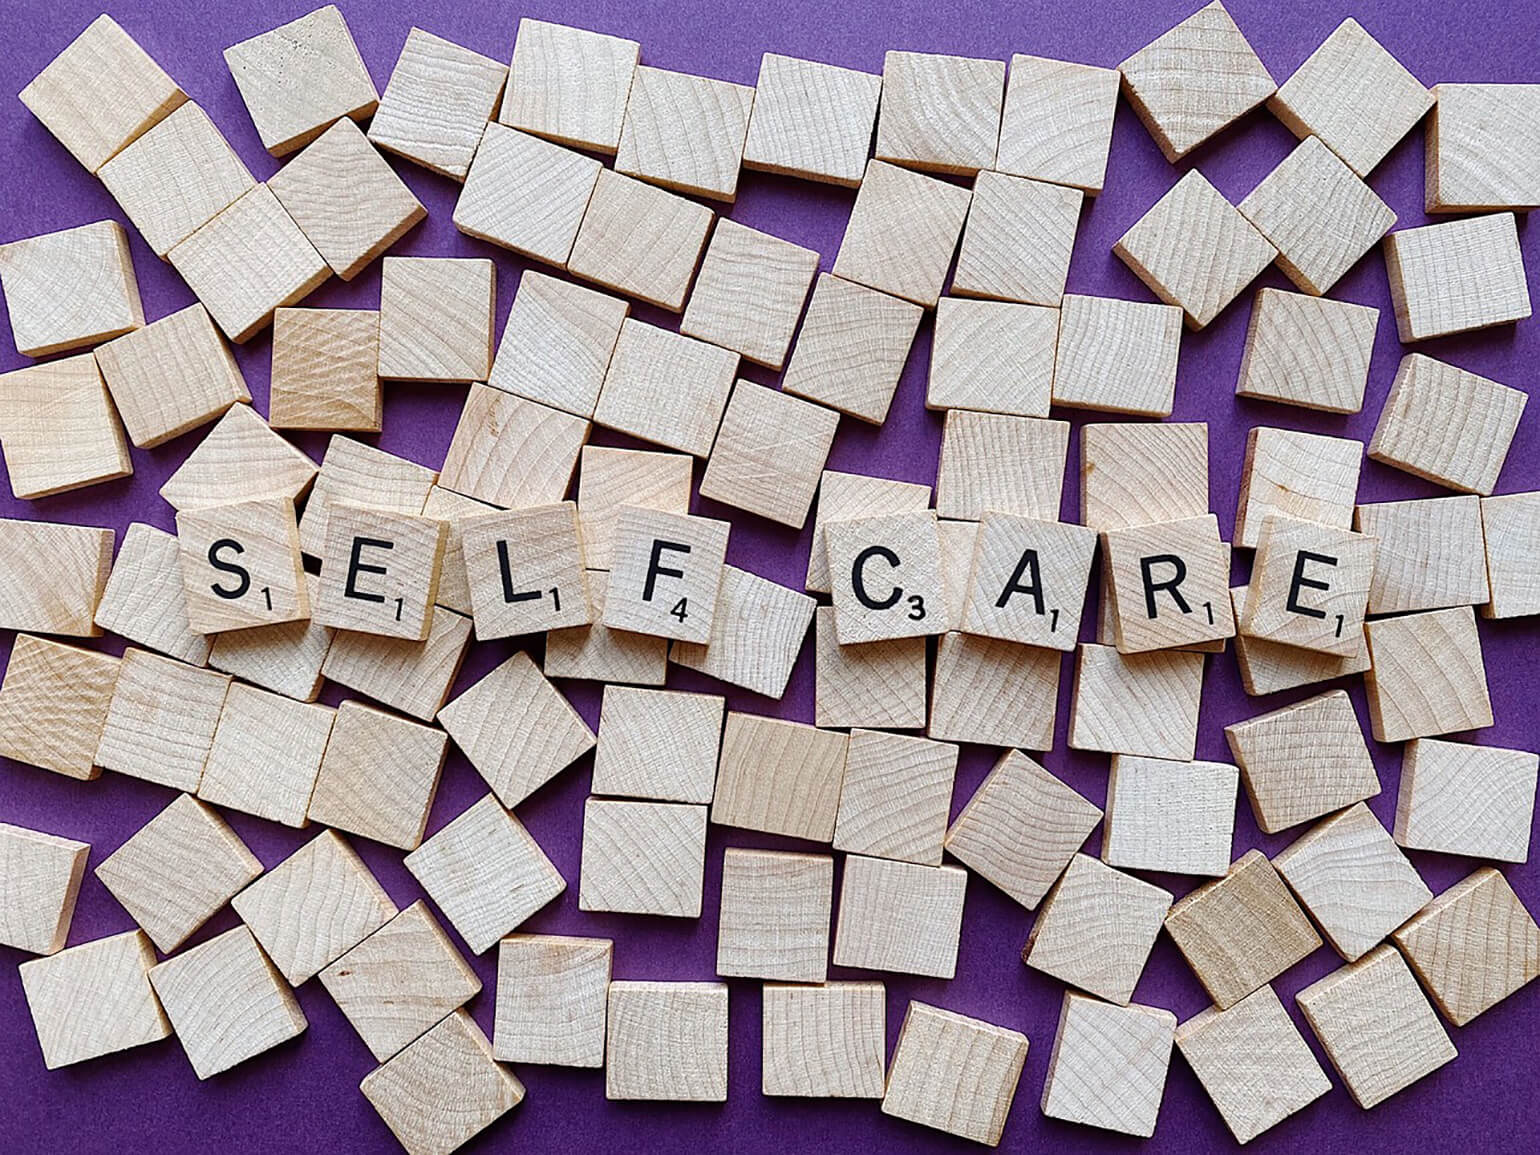 Image of wooden scrabble pieces scattered across a purple surface. Eight scrabble pieces are turned over in the middle of the pile to spell the words 'self care'.